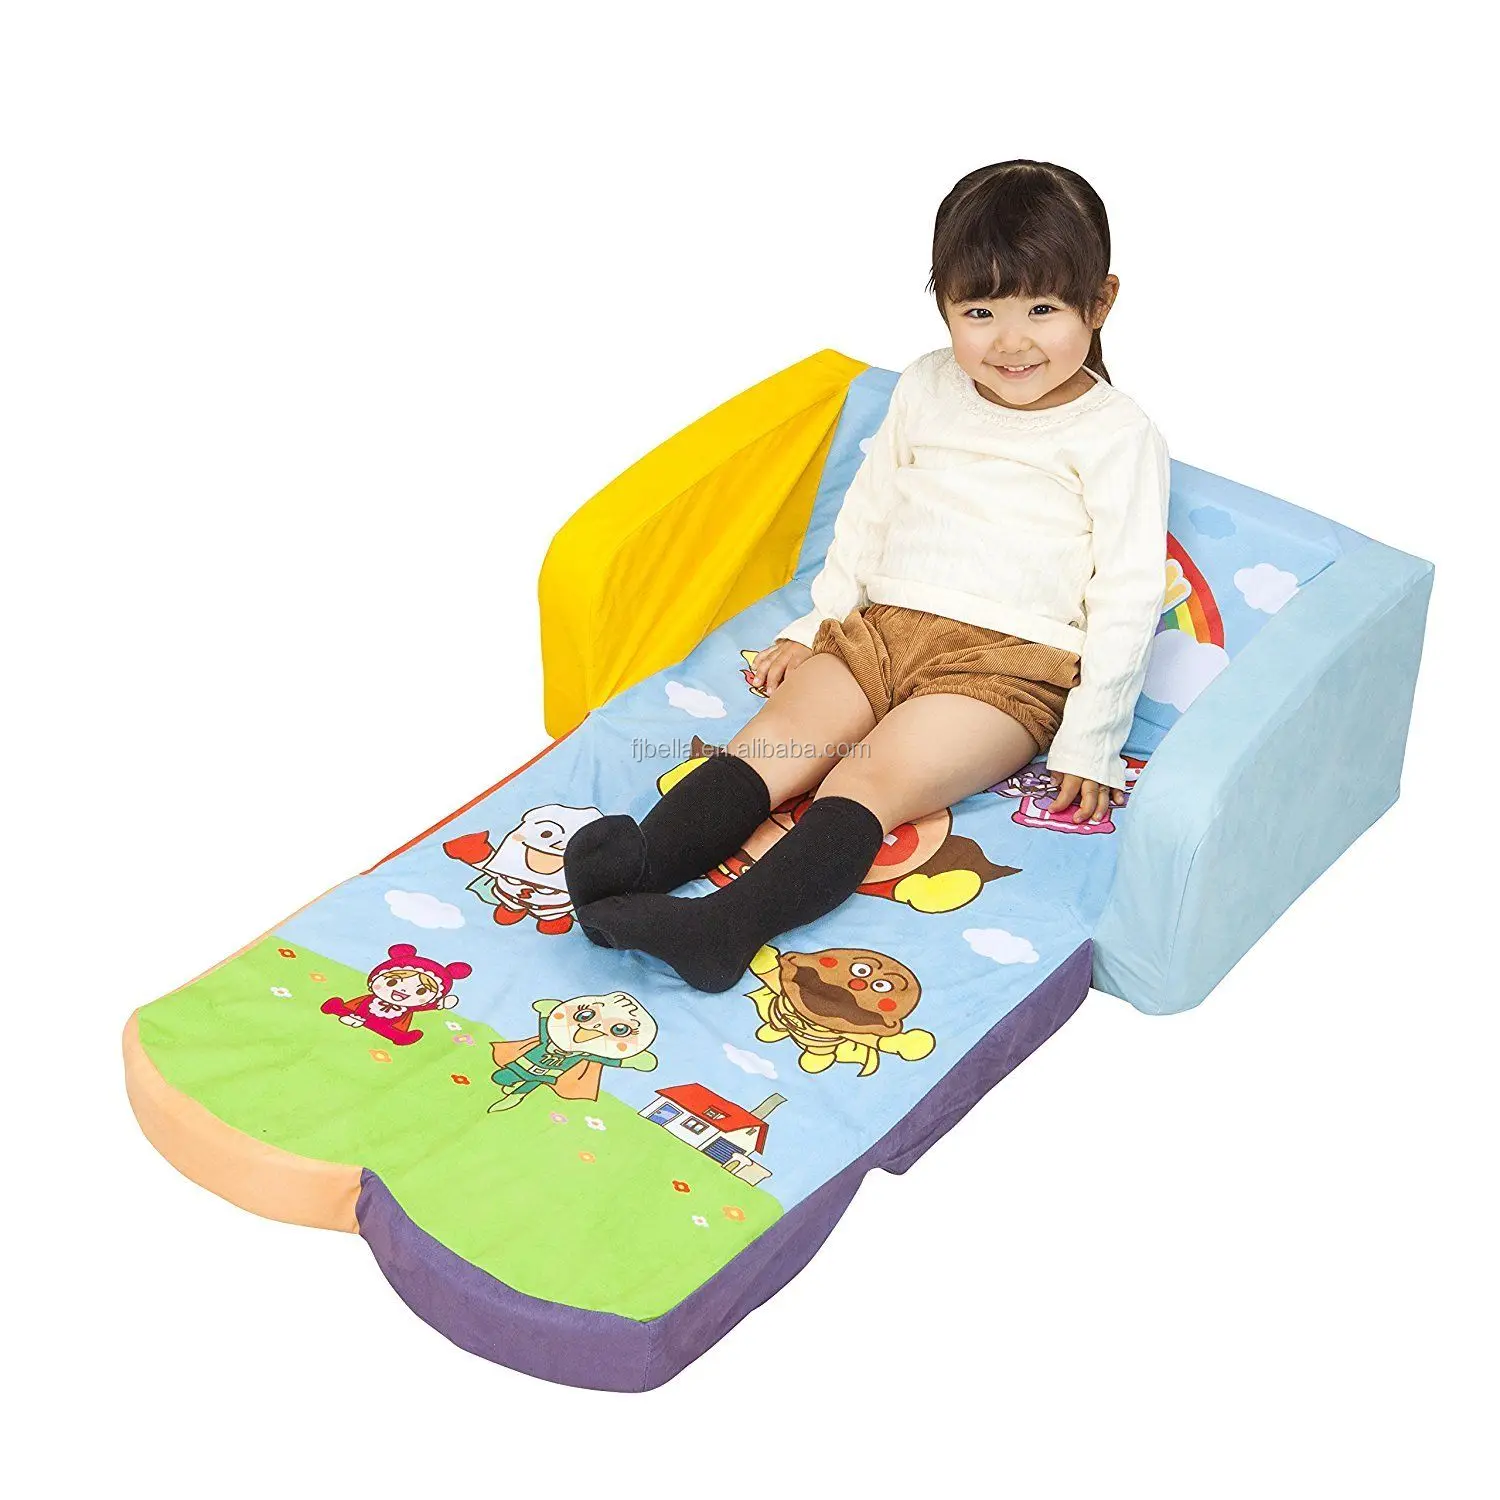 chair bed for child